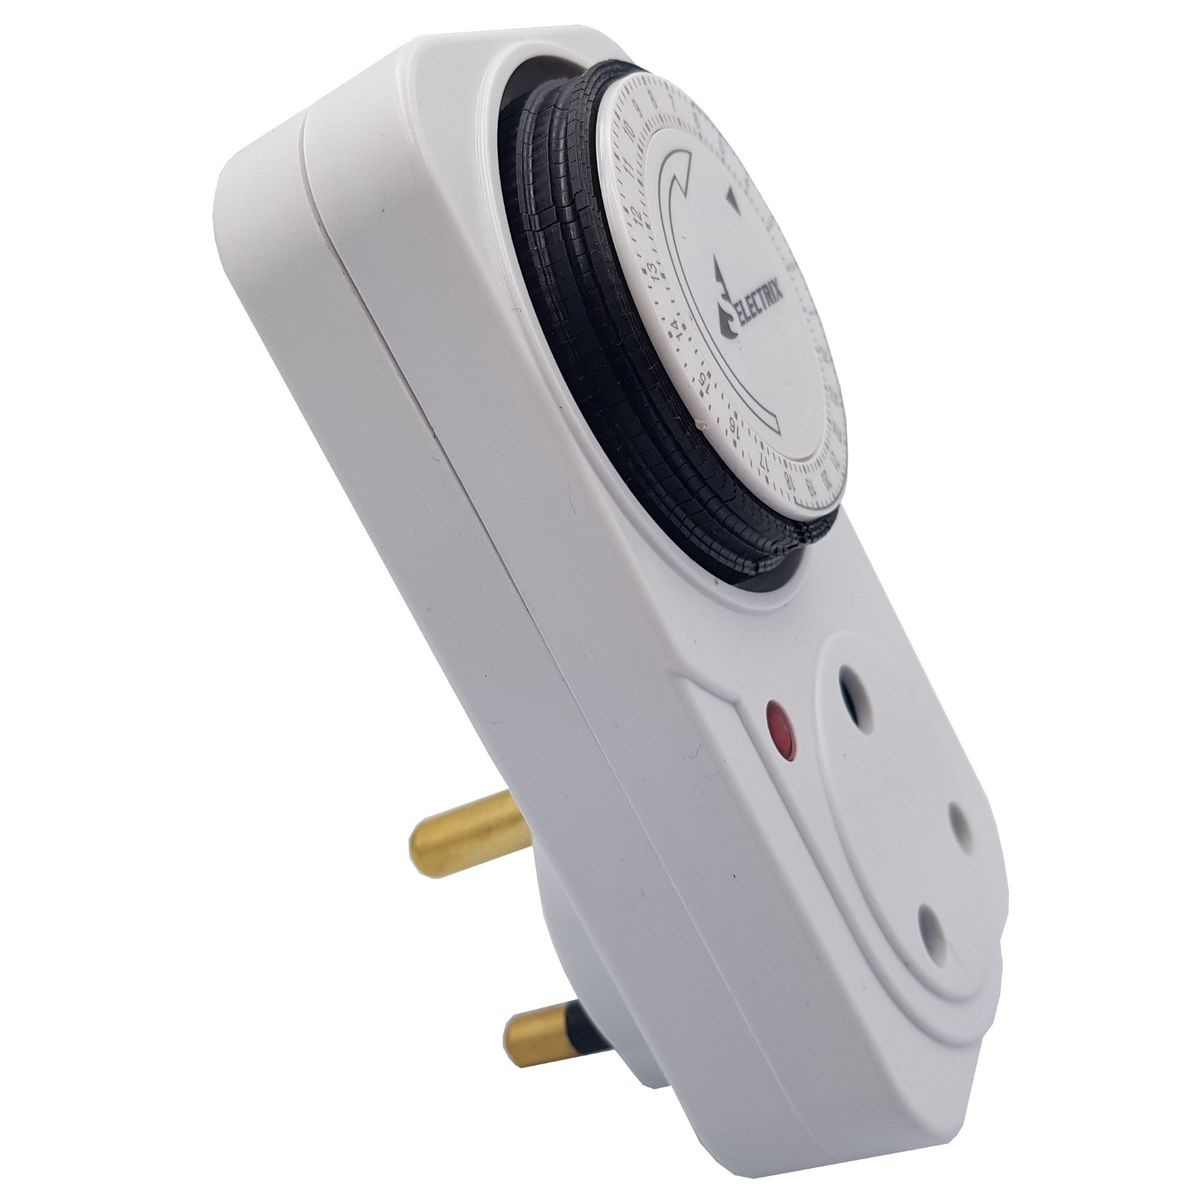 24 Hour Daily Programmable Analogue Electric Timer Plug